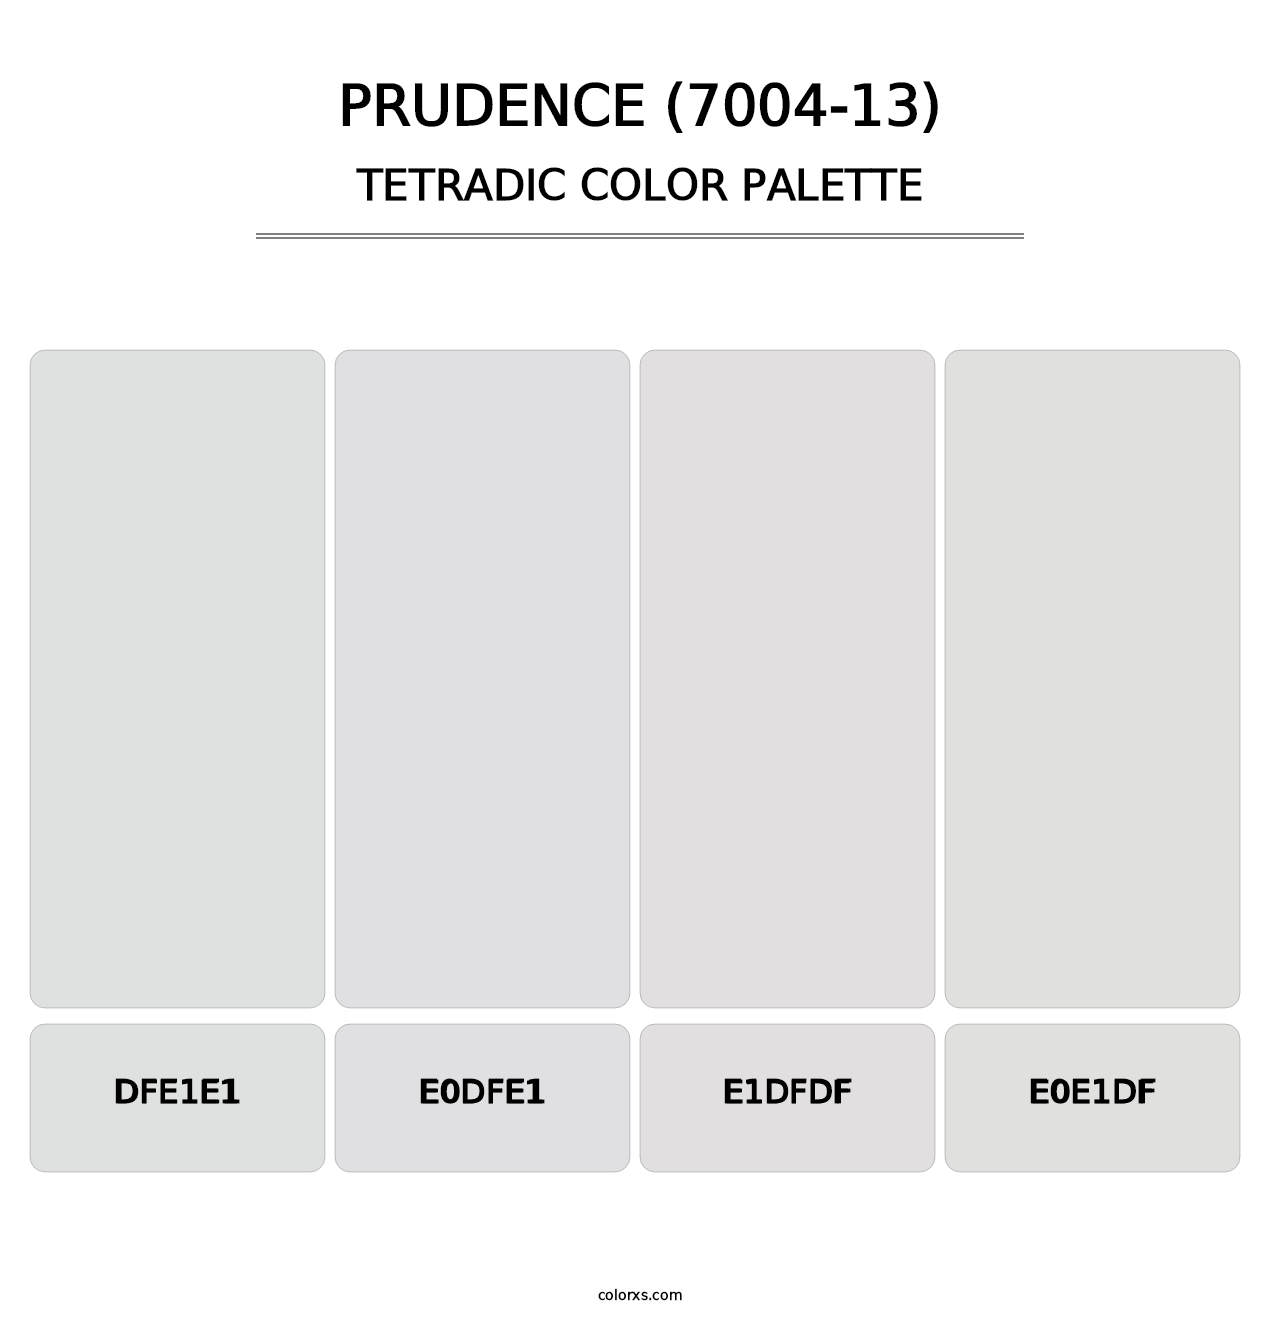 Prudence (7004-13) - Tetradic Color Palette